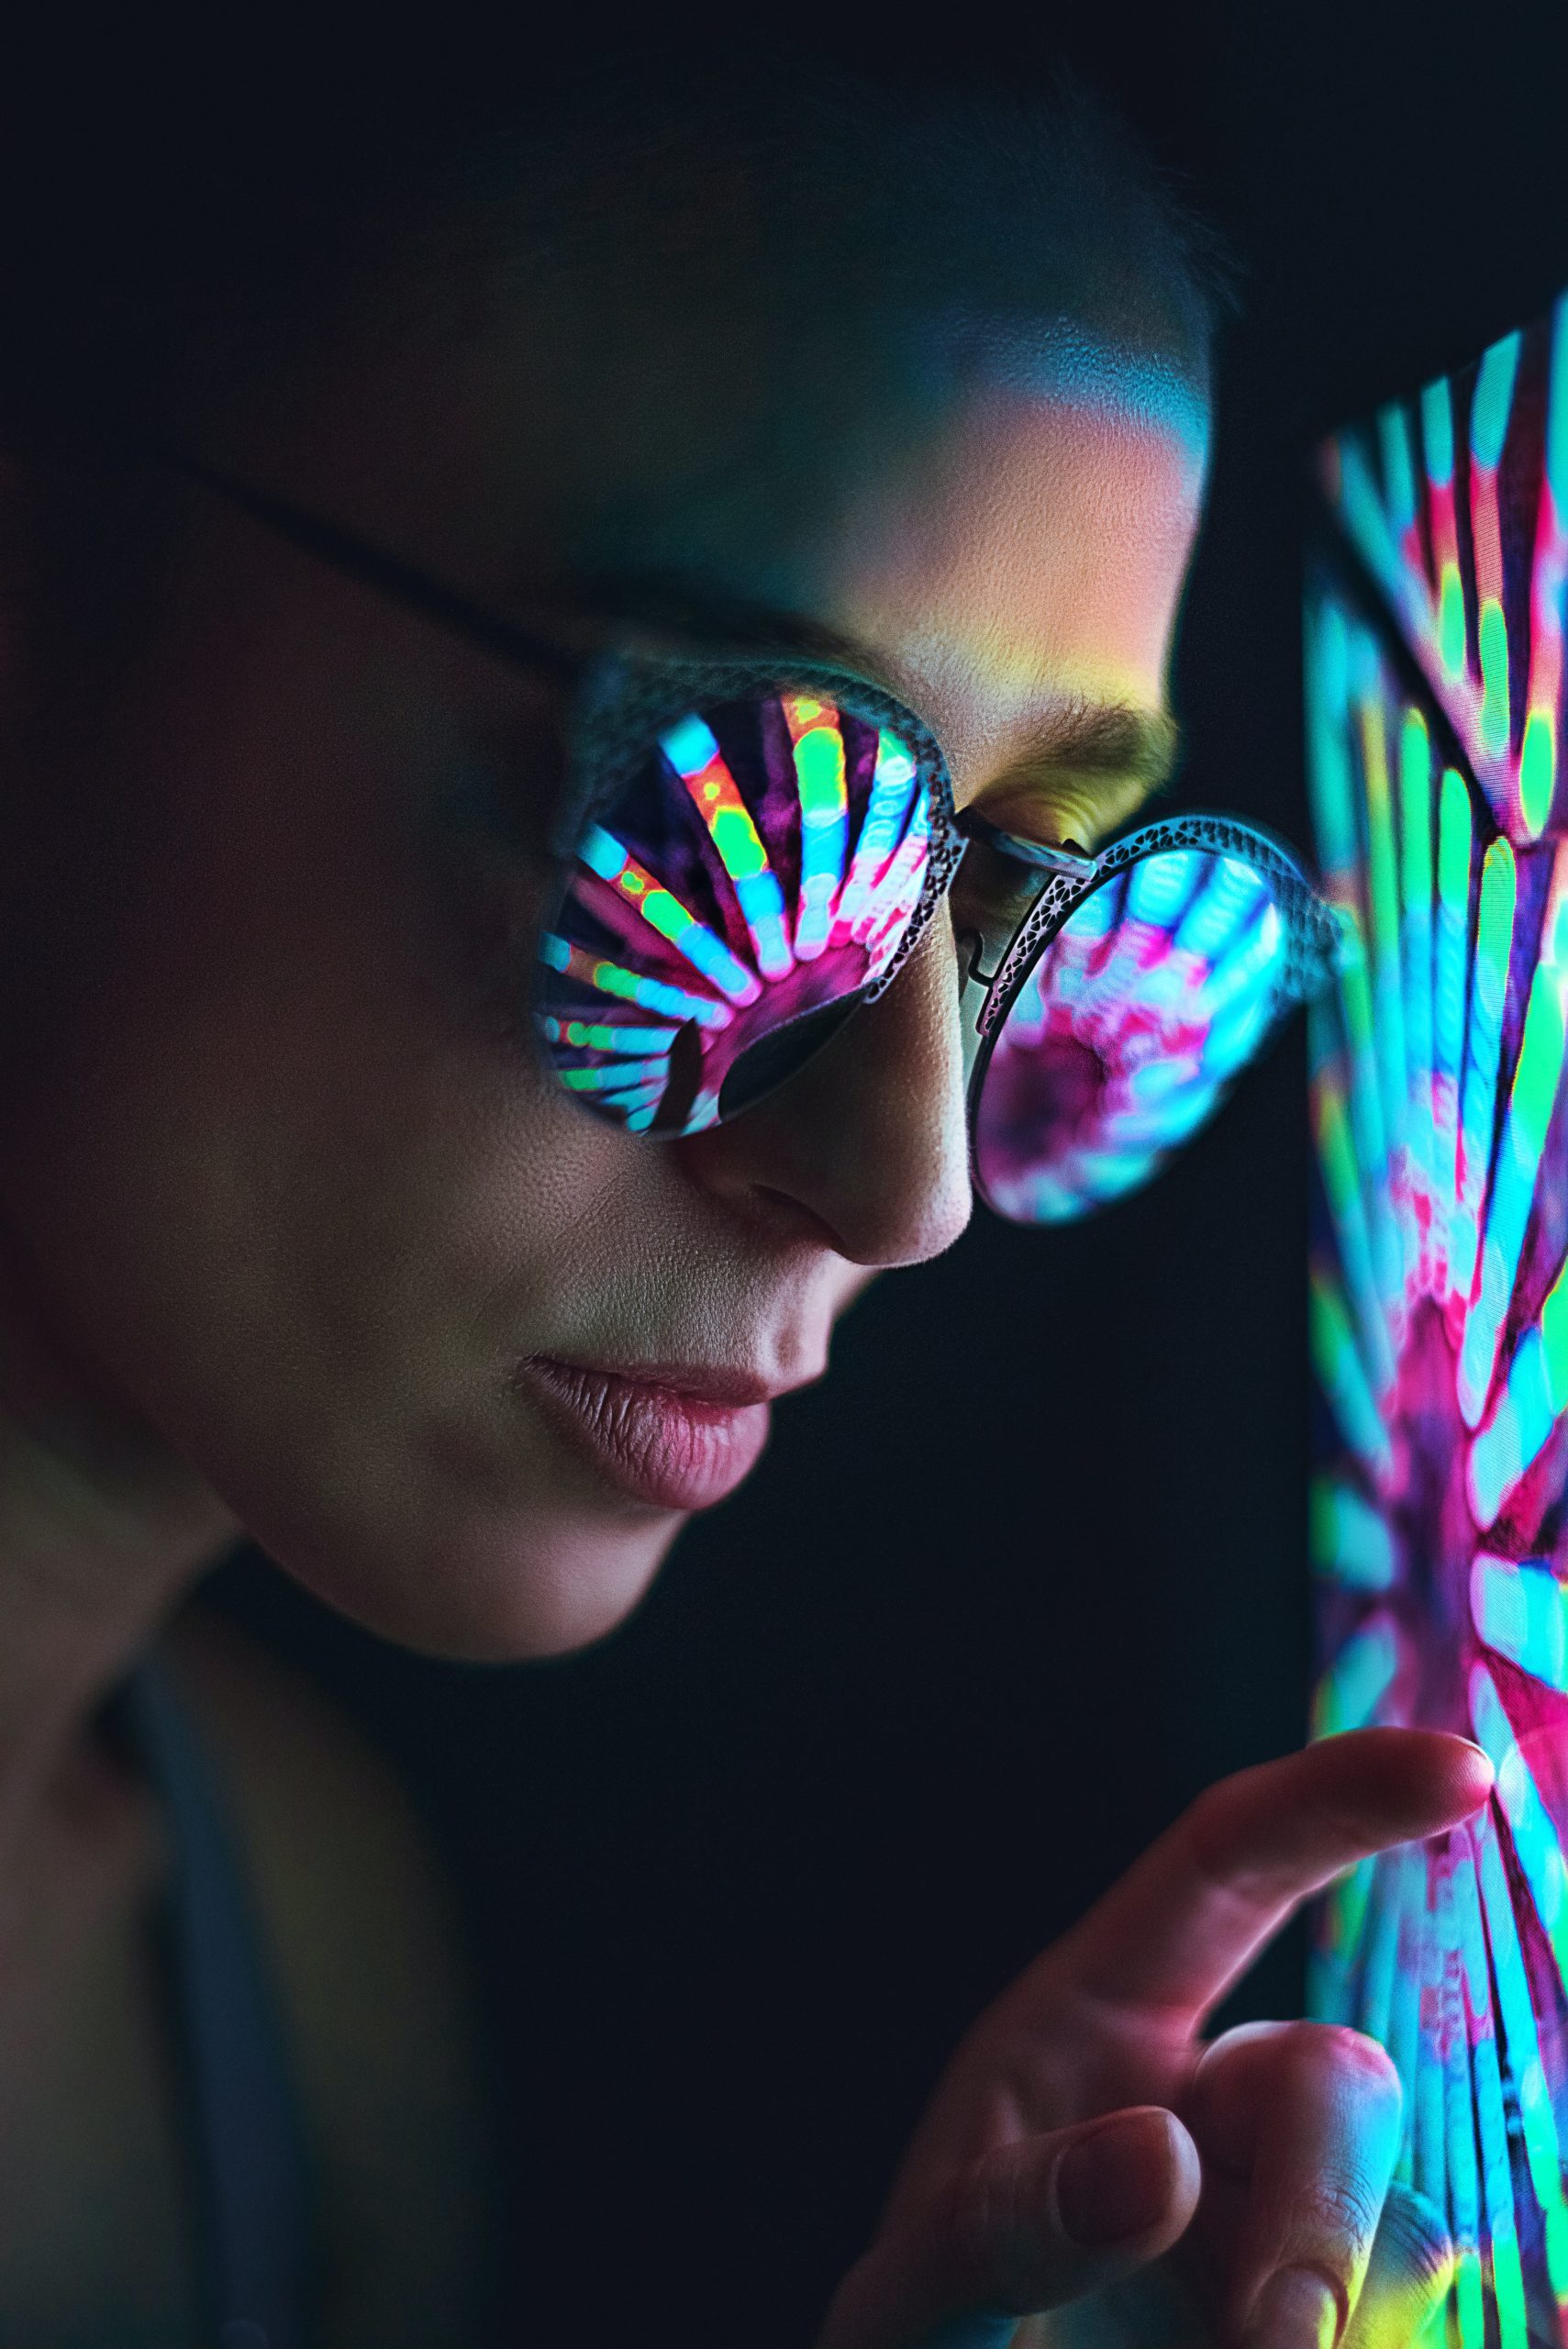 person wearing sunglasses with colourful lights reflected in the glasses